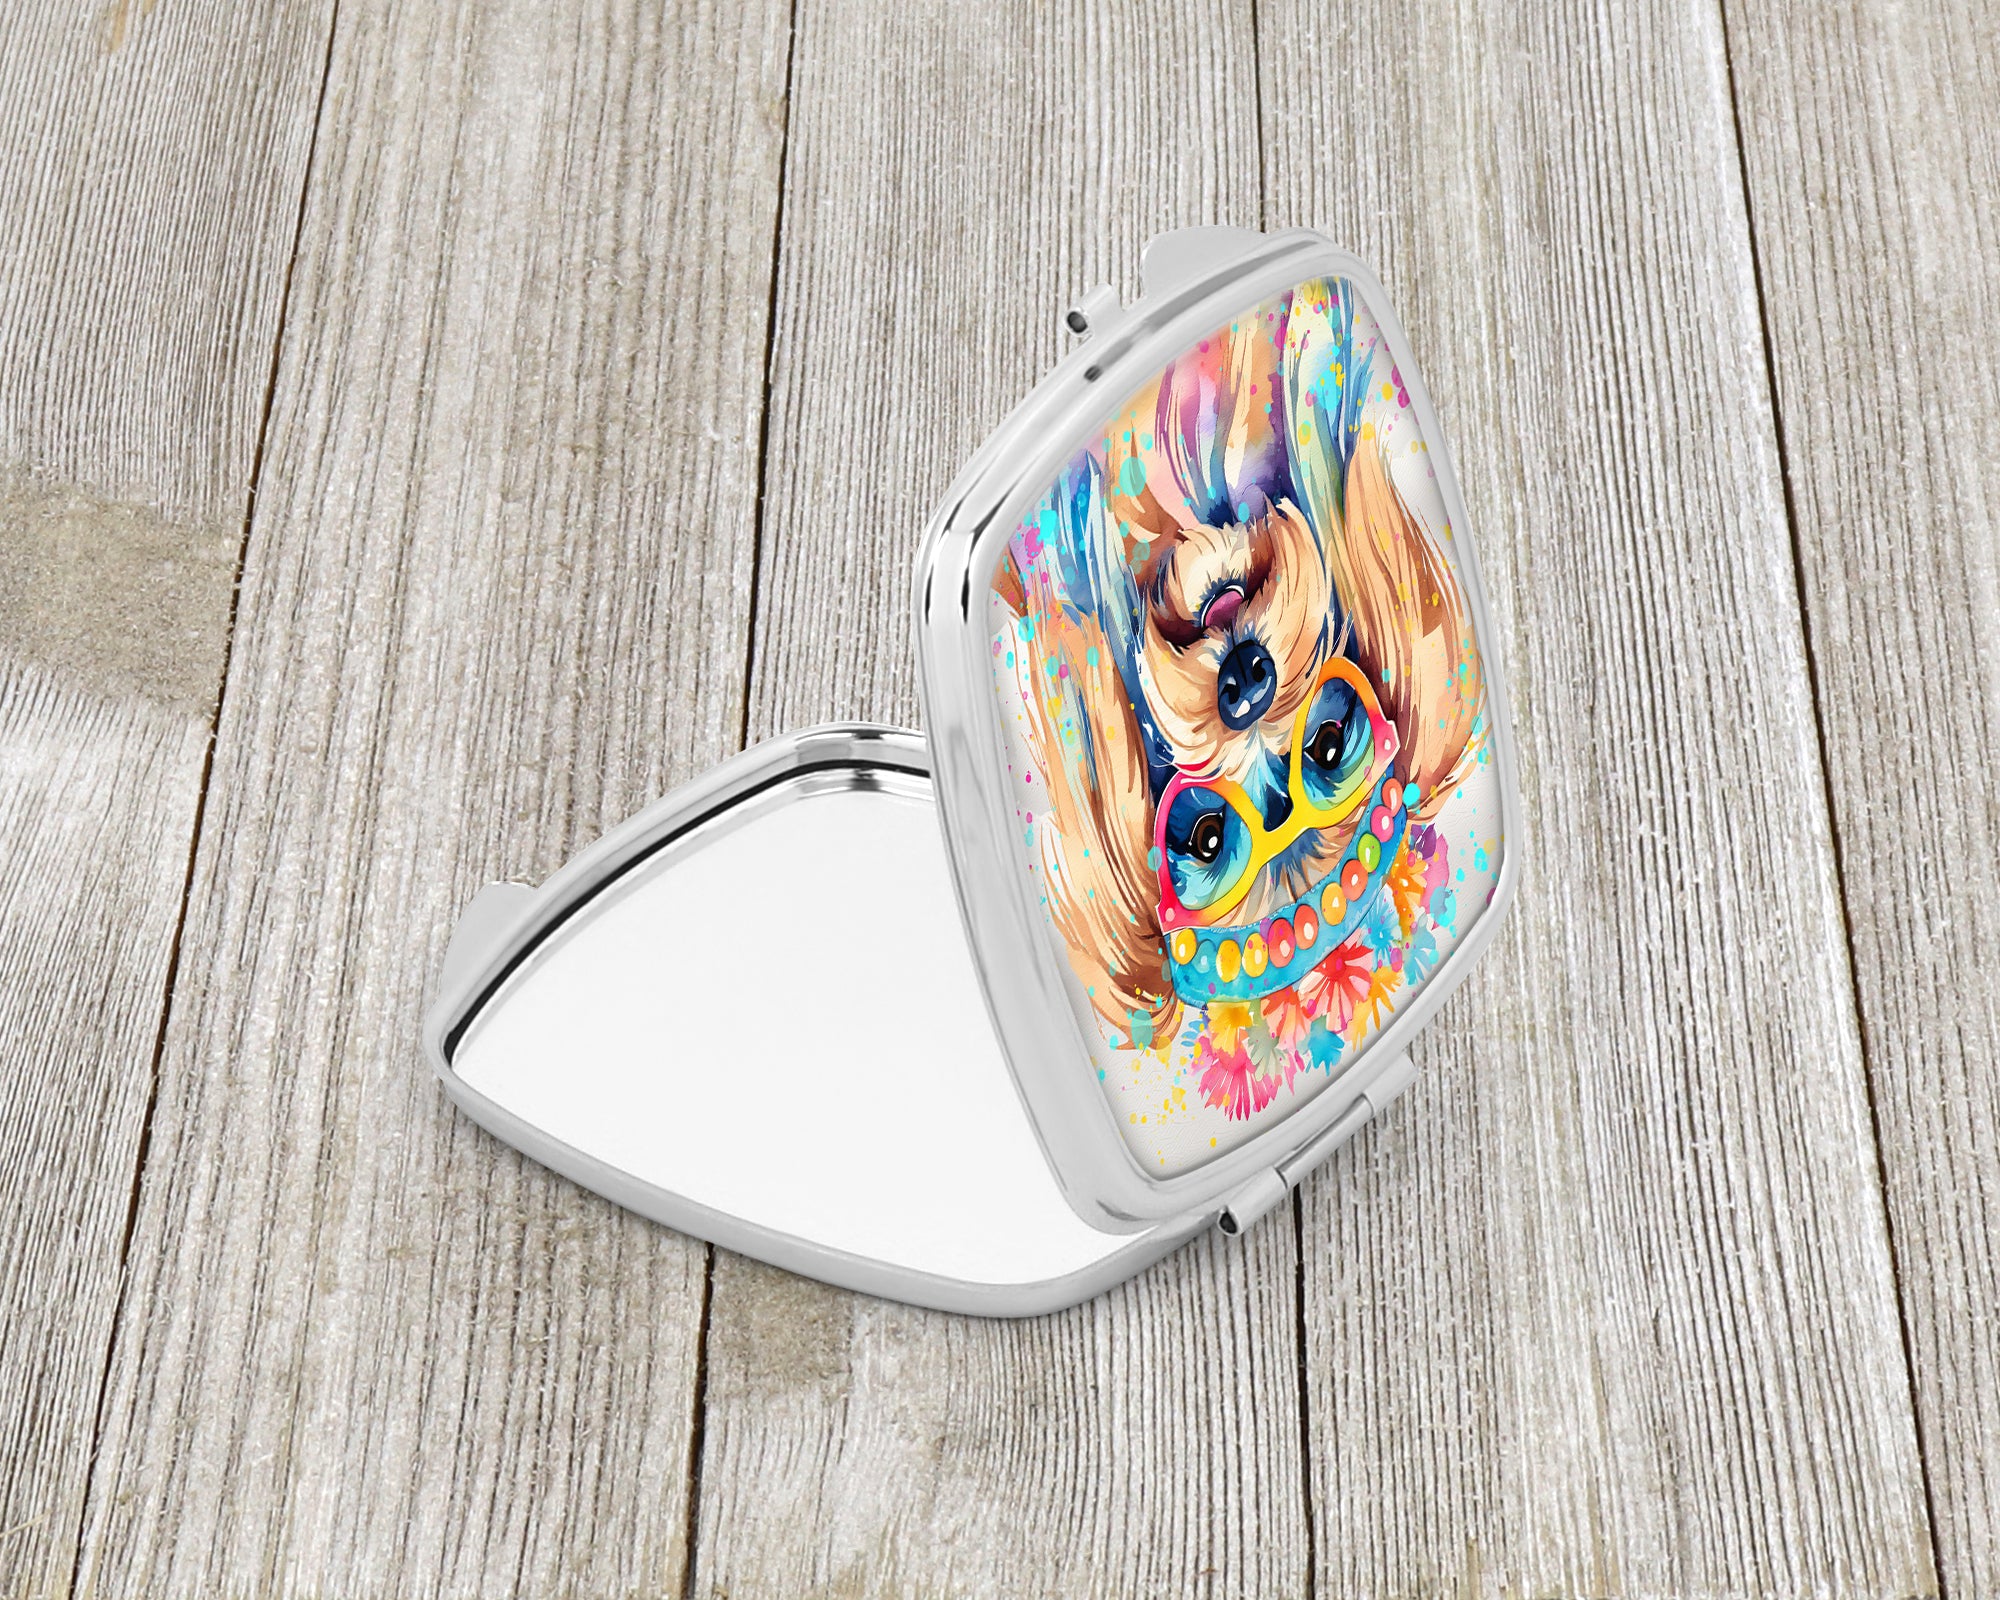 Yorkshire Terrier Hippie Dawg Compact Mirror